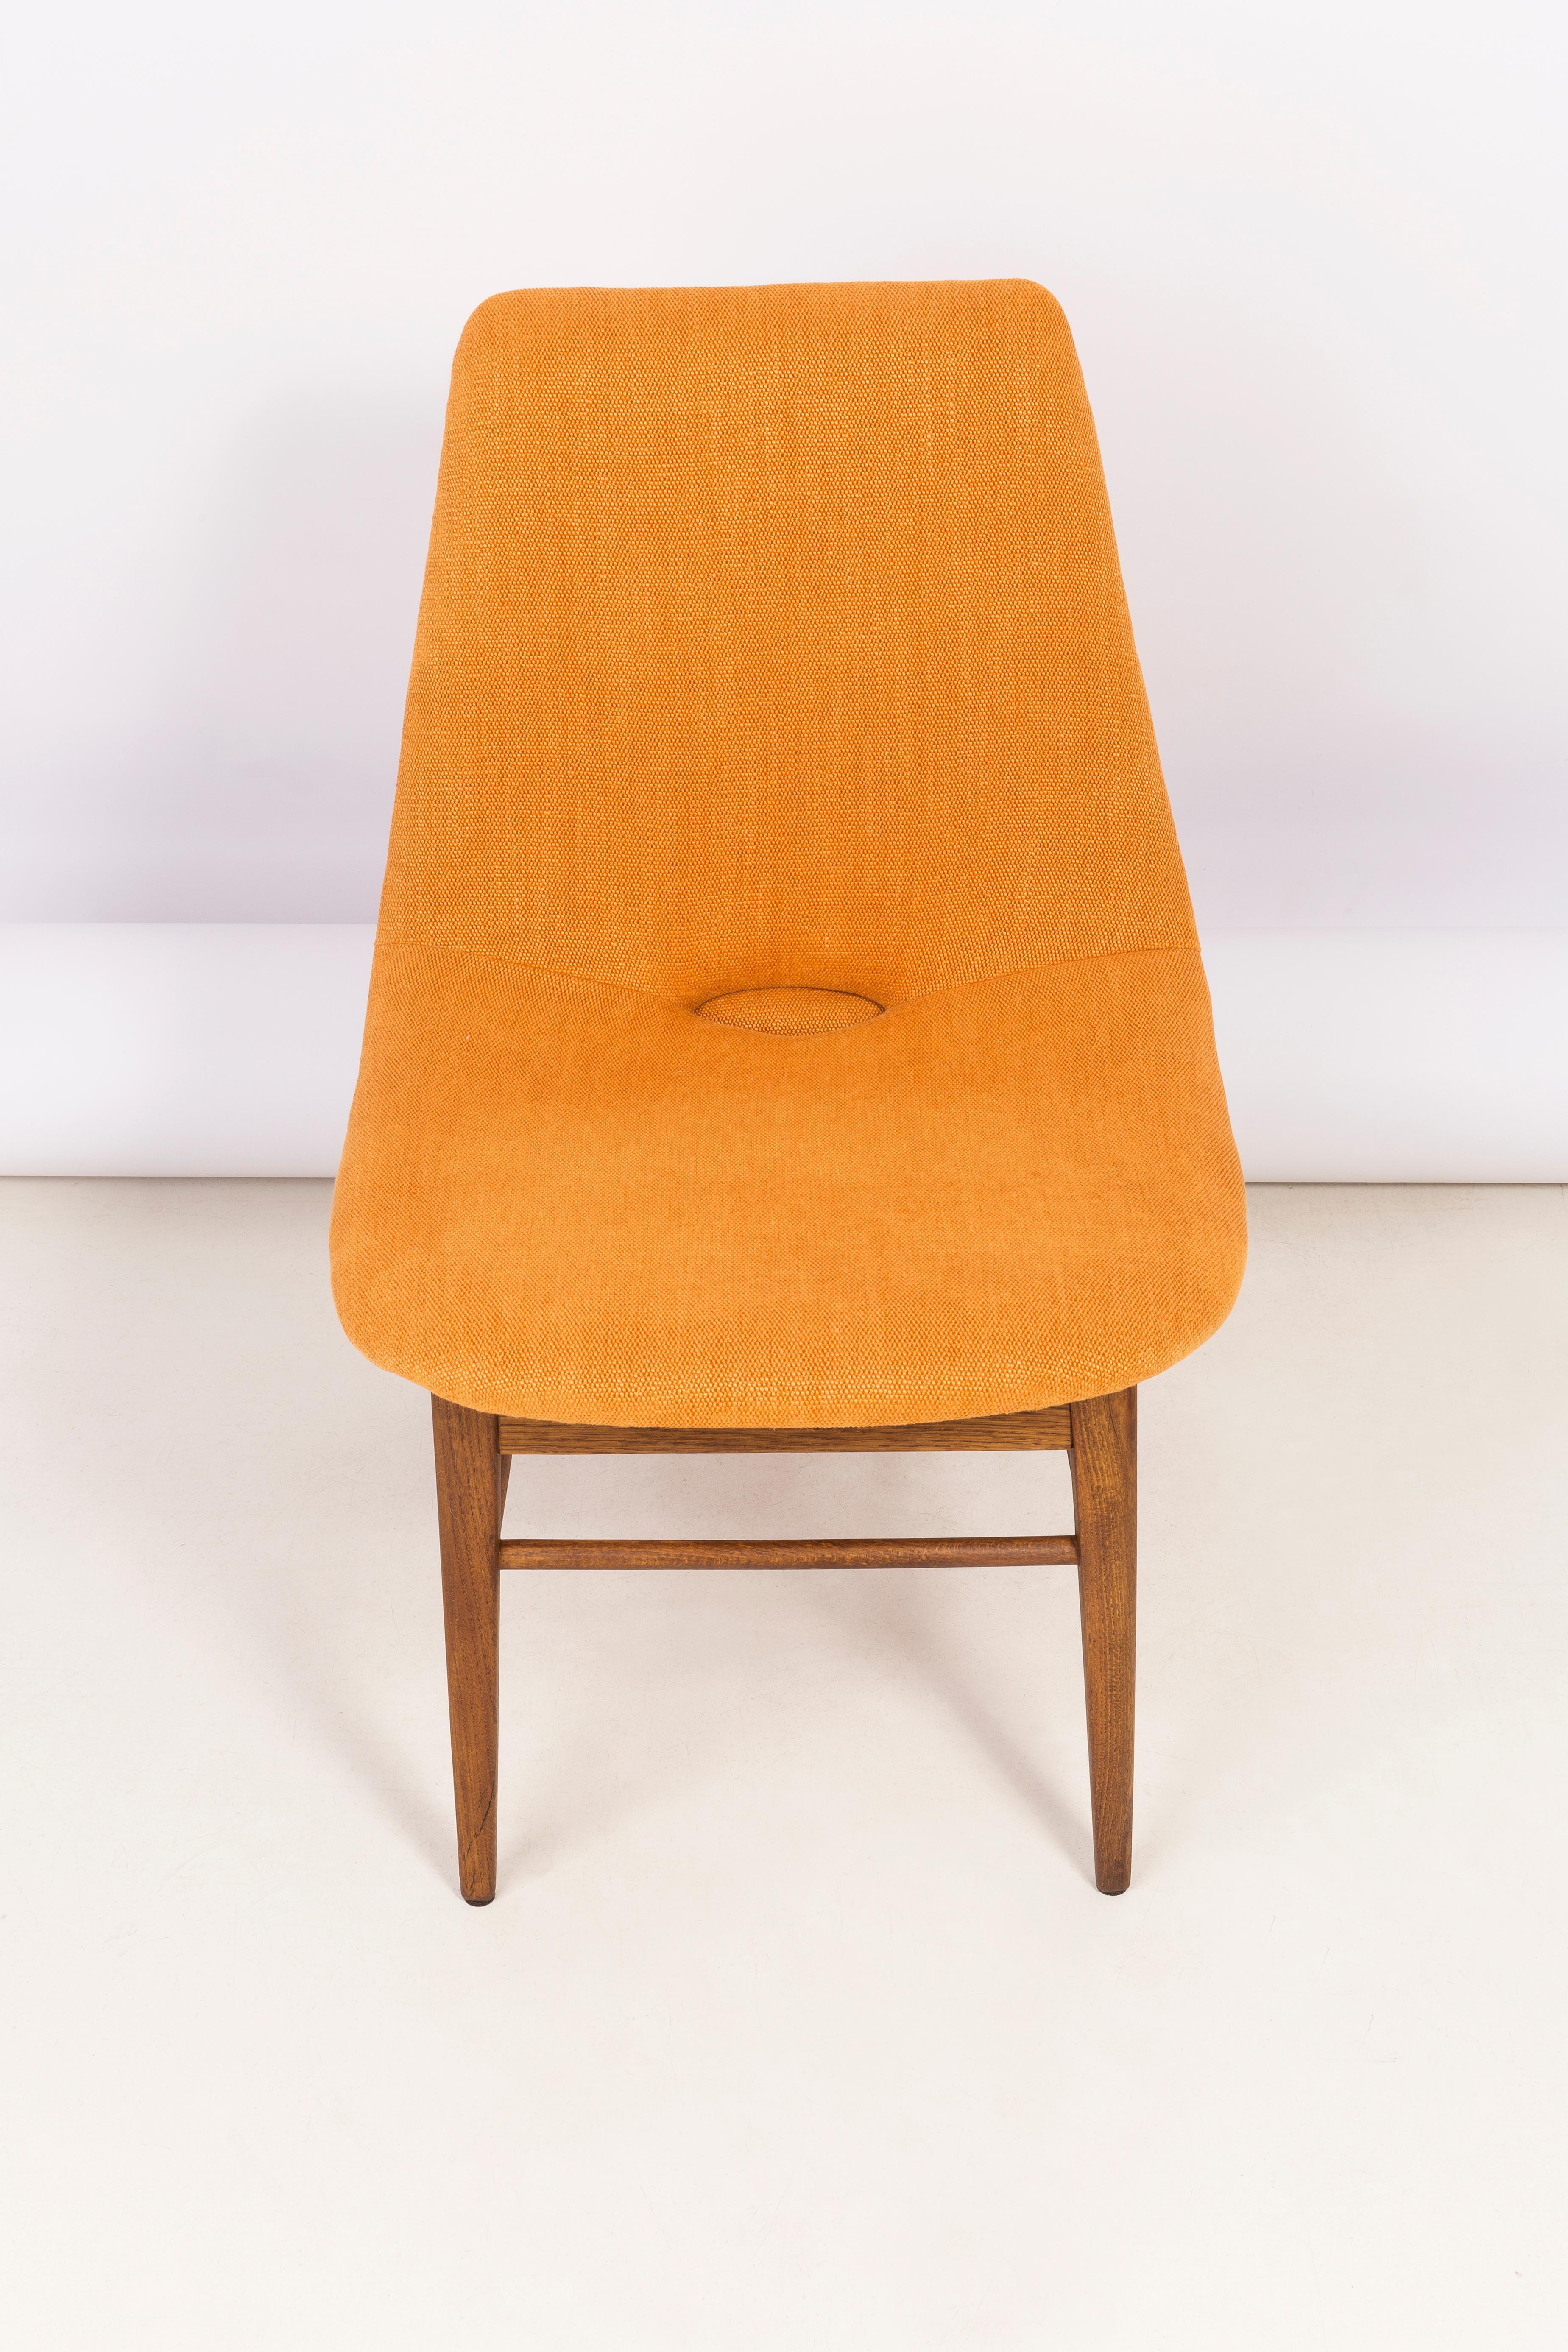 Set of Two Rare 20th Century Orange Shell Chairs, H. Lachert, 1960s For Sale 6